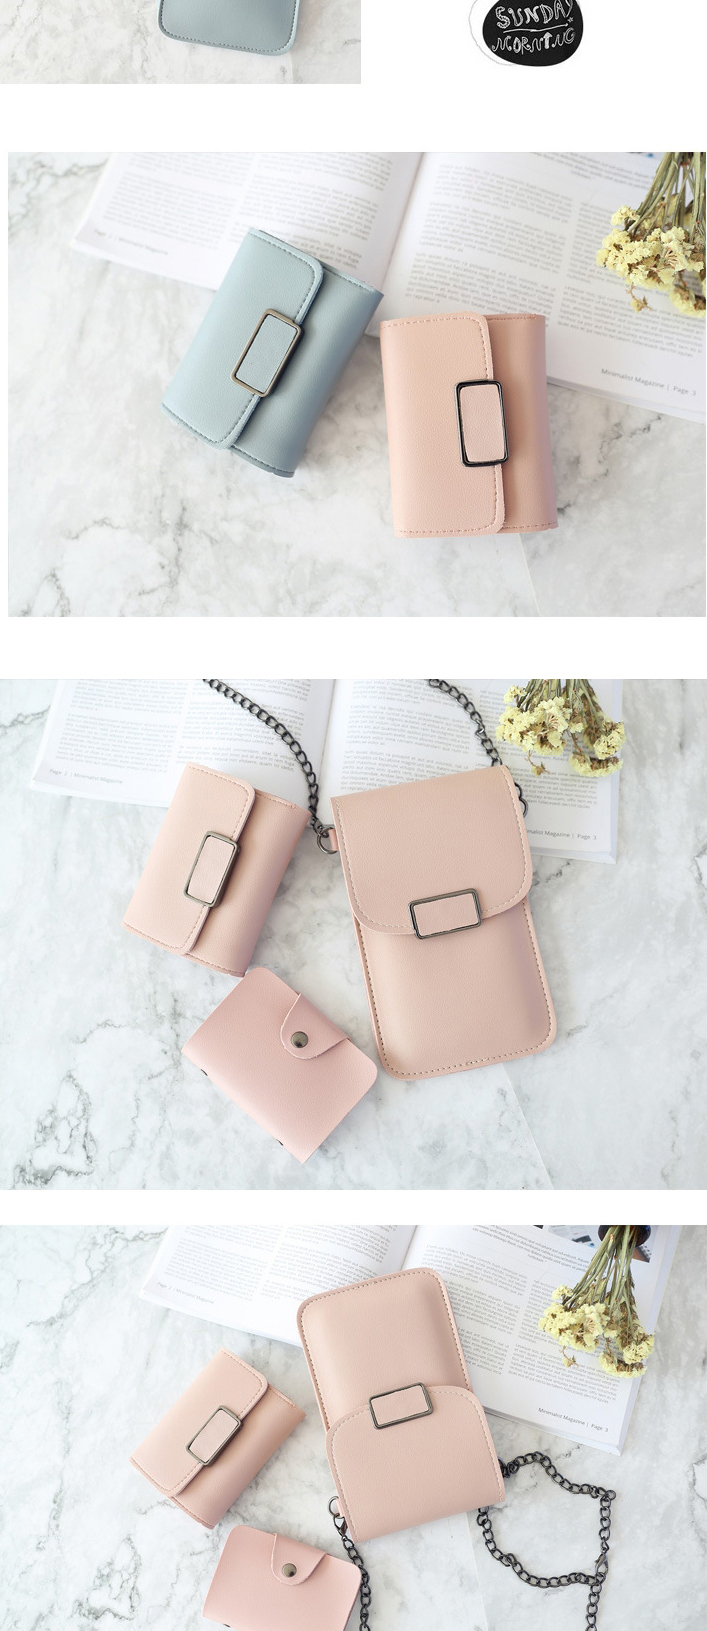 Fashion Light Grey Three-piece Set Of Square Buckle Touch Screen Chain Mobile Phone Bag Wallet Card Bag,Wallet